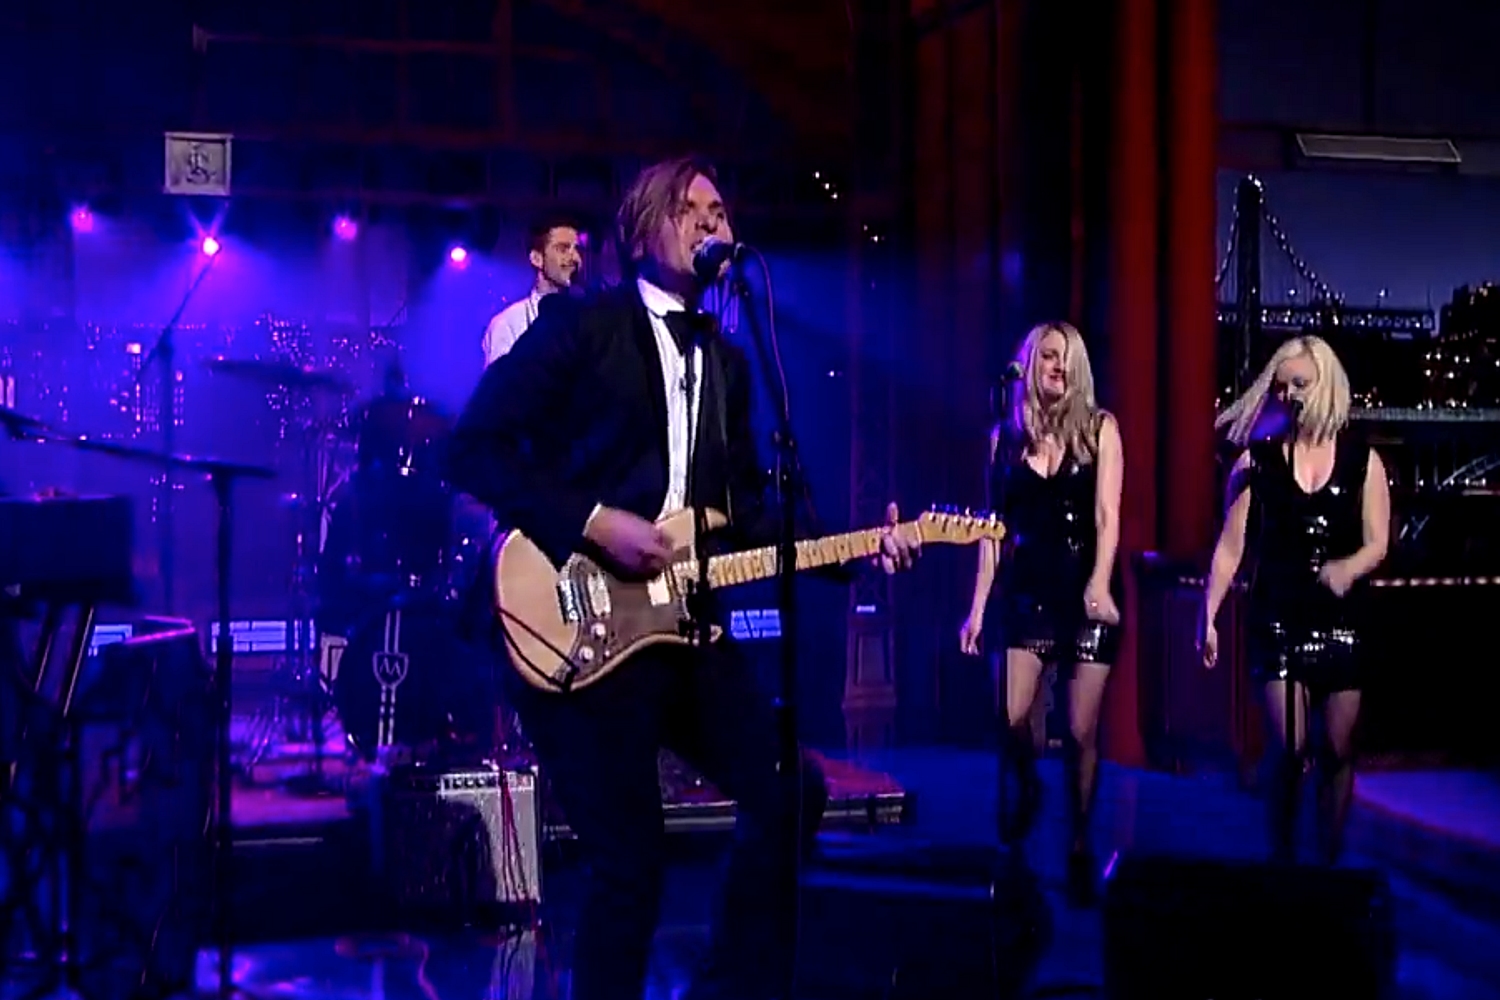 Watch Will Butler make solo television debut with ‘Take My Side’ on Letterman